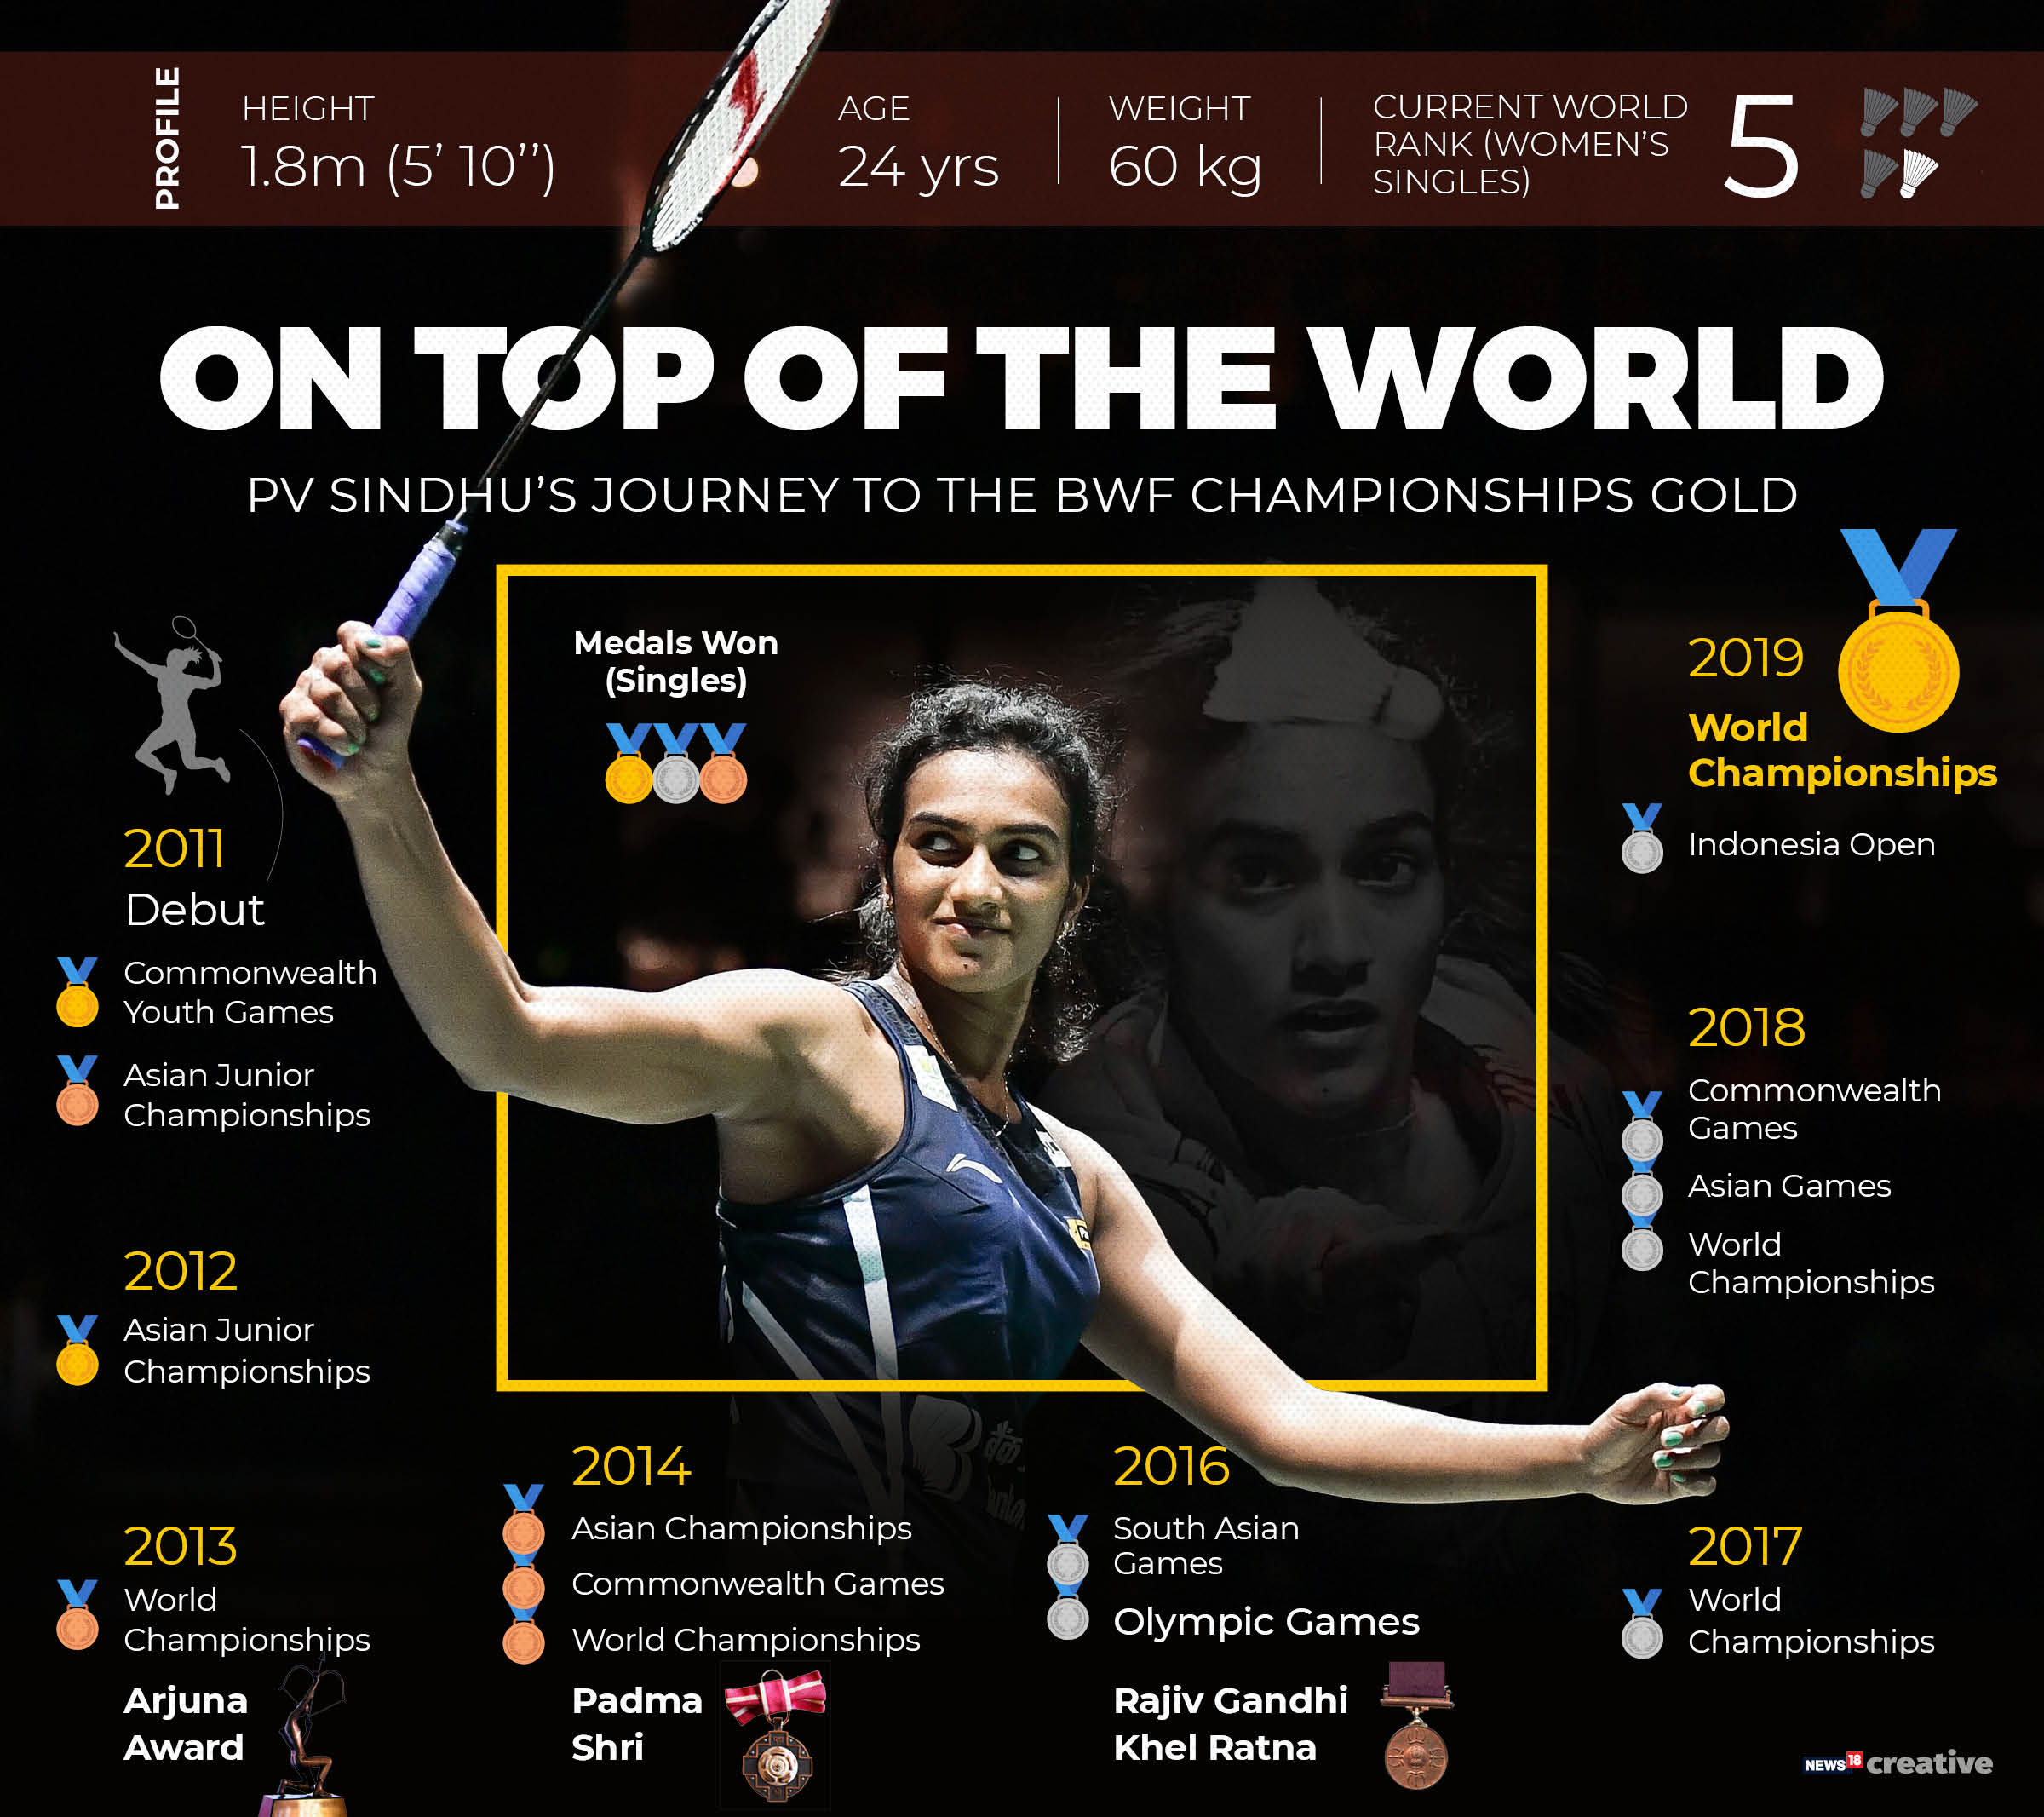 PV Sindhu's journey to the top of the world